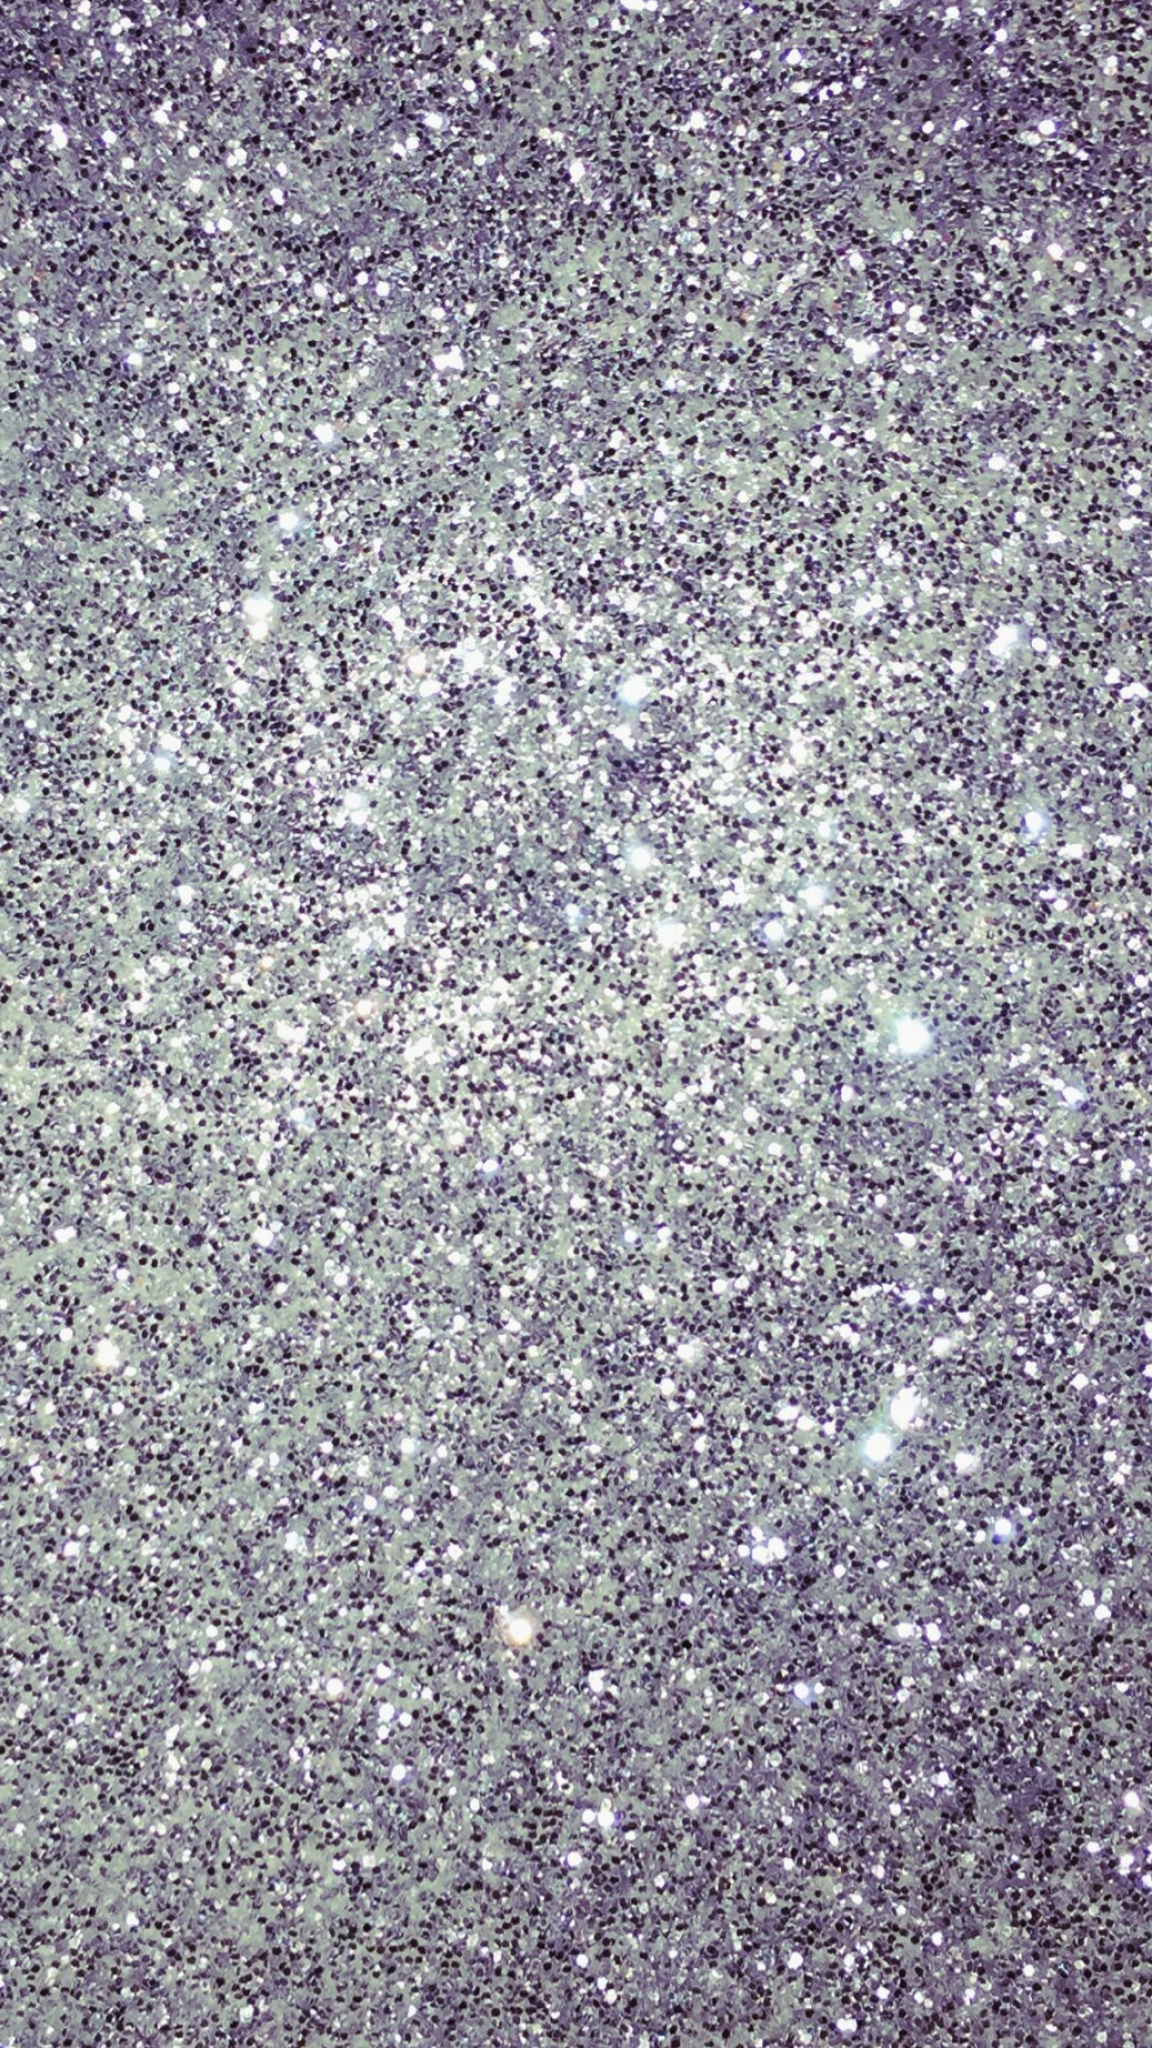 Sparkle: Glitter, Used to decorate different things to give them a special look. 1160x2050 HD Wallpaper.